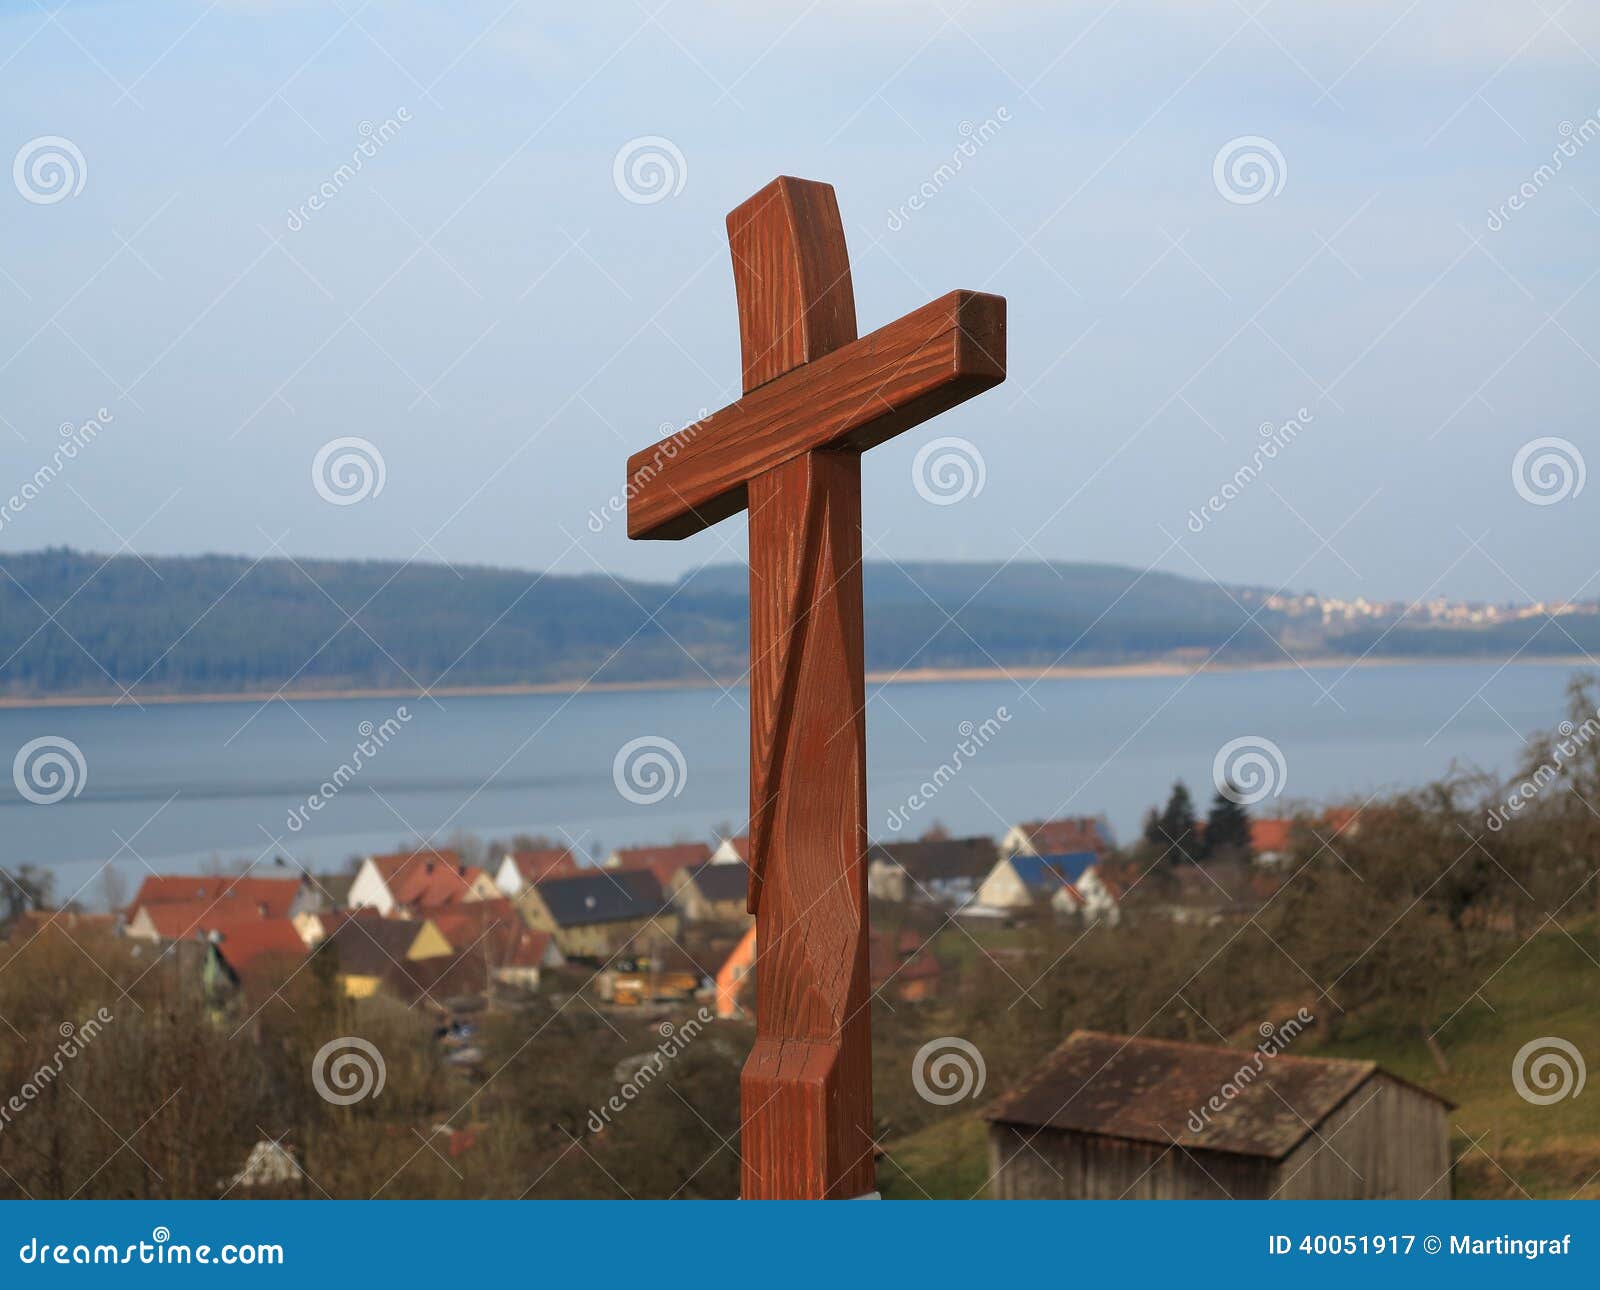 wooden cross at pilgrimage route by lakeside village